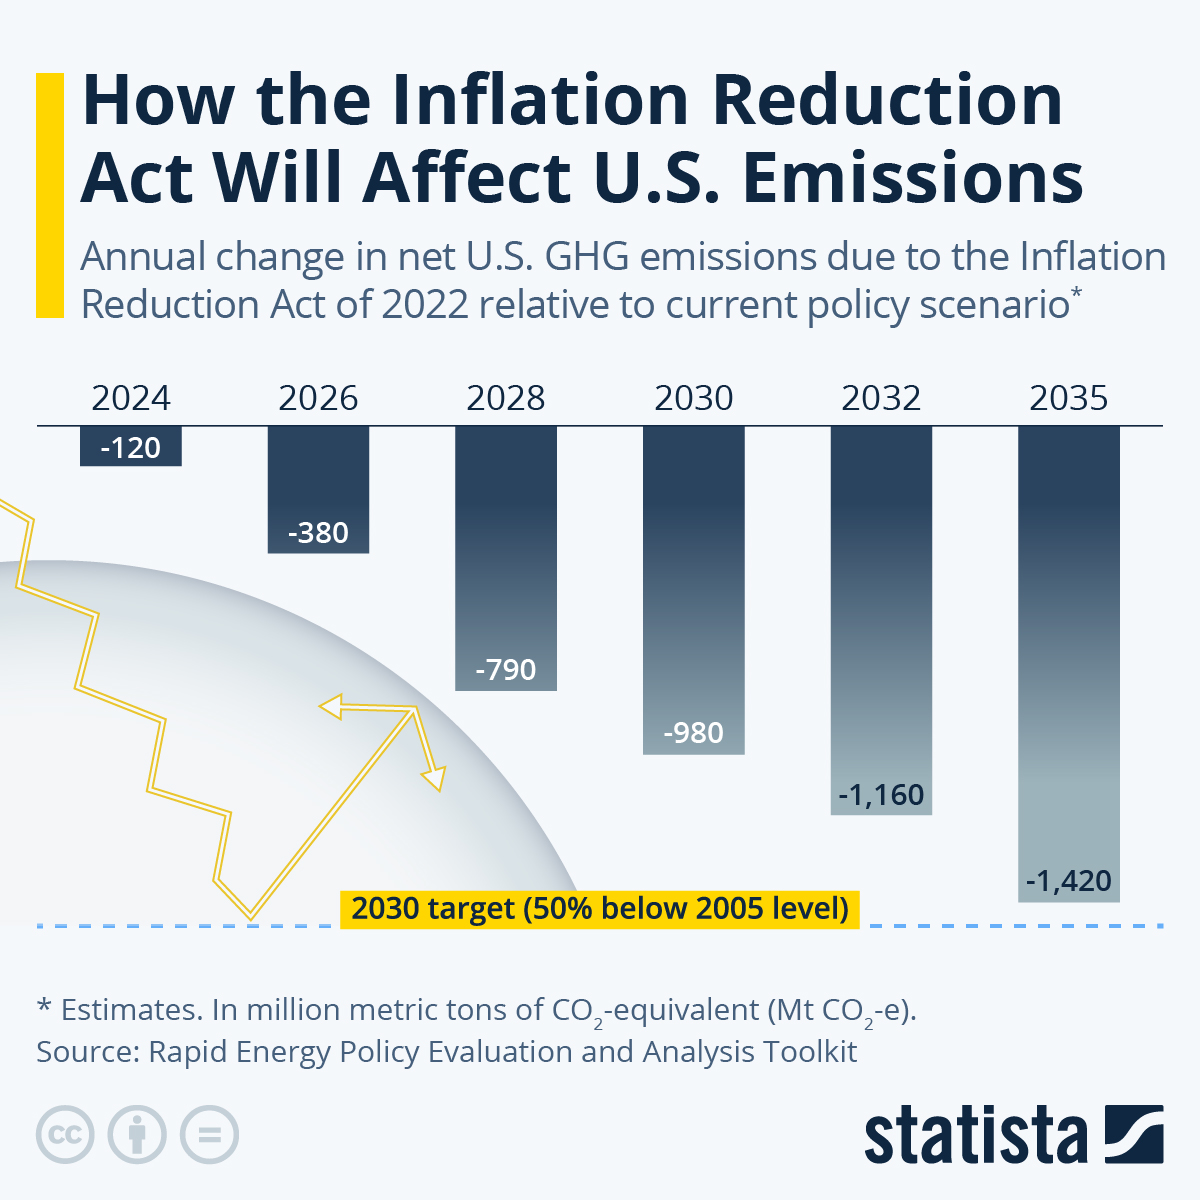 Chart Title: How the Inflation Reduction Act Will Affect U.S. EmissionsAnnual change in new U.S. GHG emissions due to the Inflation Reduction Act of 2022 relative to current policy scenario. *Estimates. In million metric tons of CO2-equivalent Source: Rapid Energy Policy Evaluation and Analysis Toolkit